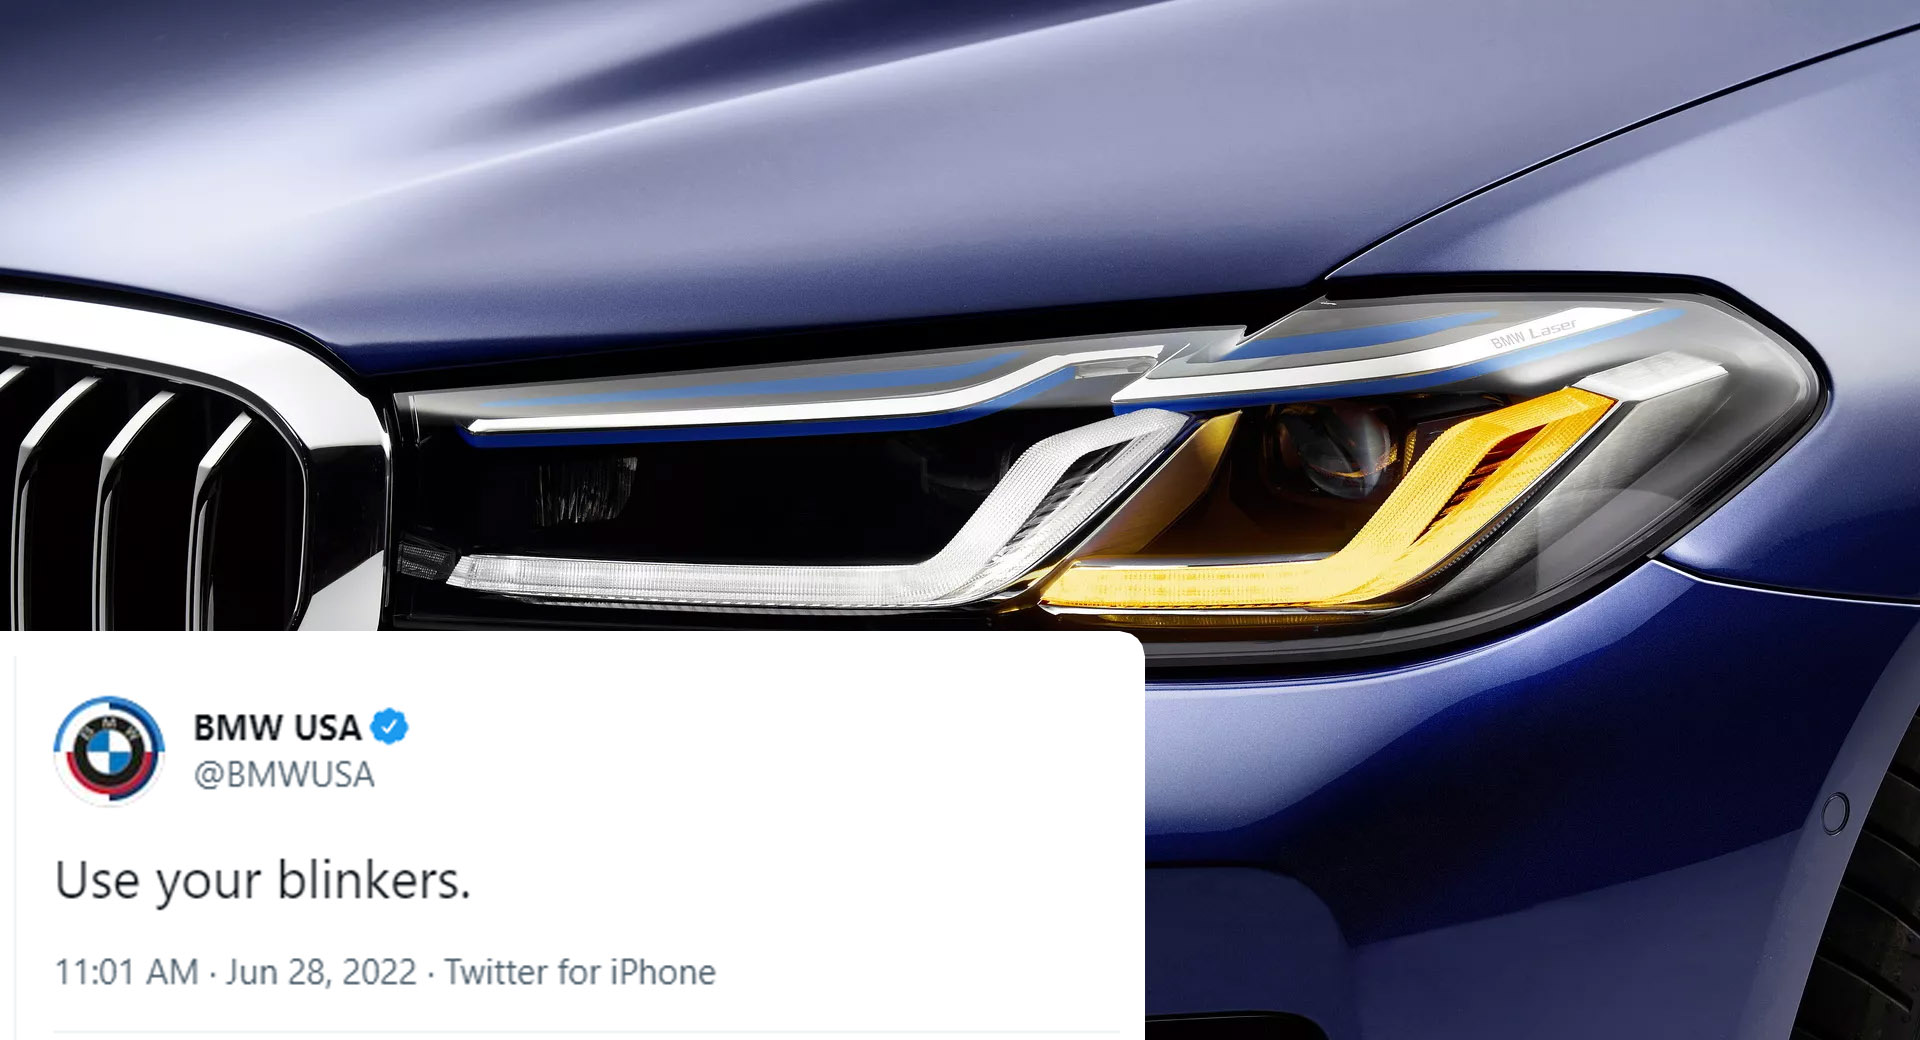 BMW Takes To Twitter To Remind Its Drivers To Use Their Turn Signals